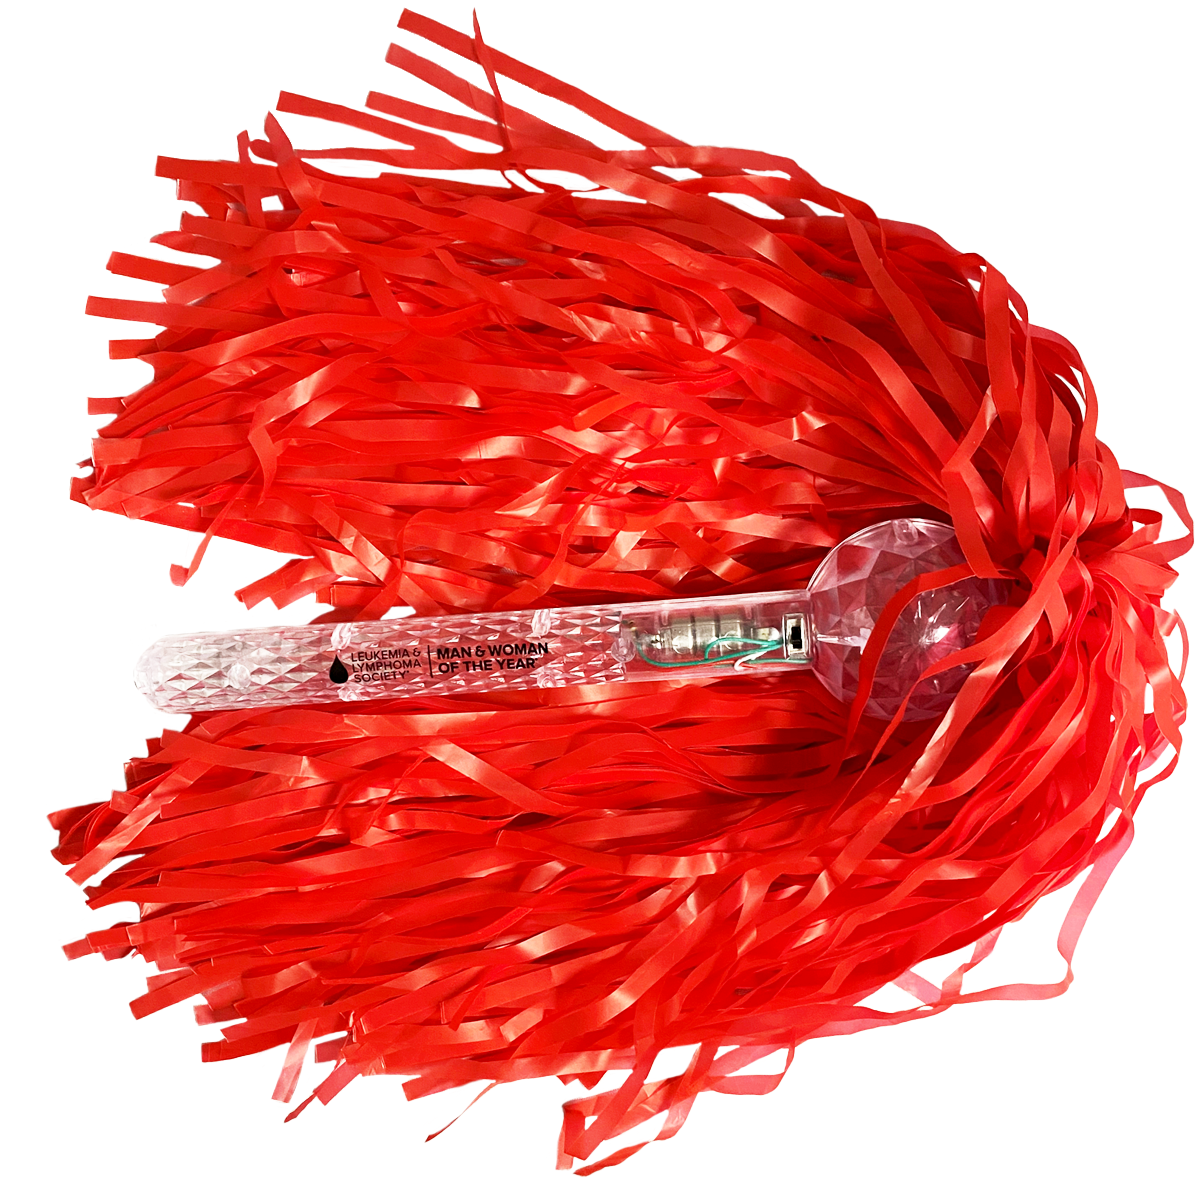 Man & Women of the Year Light Up Red Pom Poms - IN STOCK ITEM